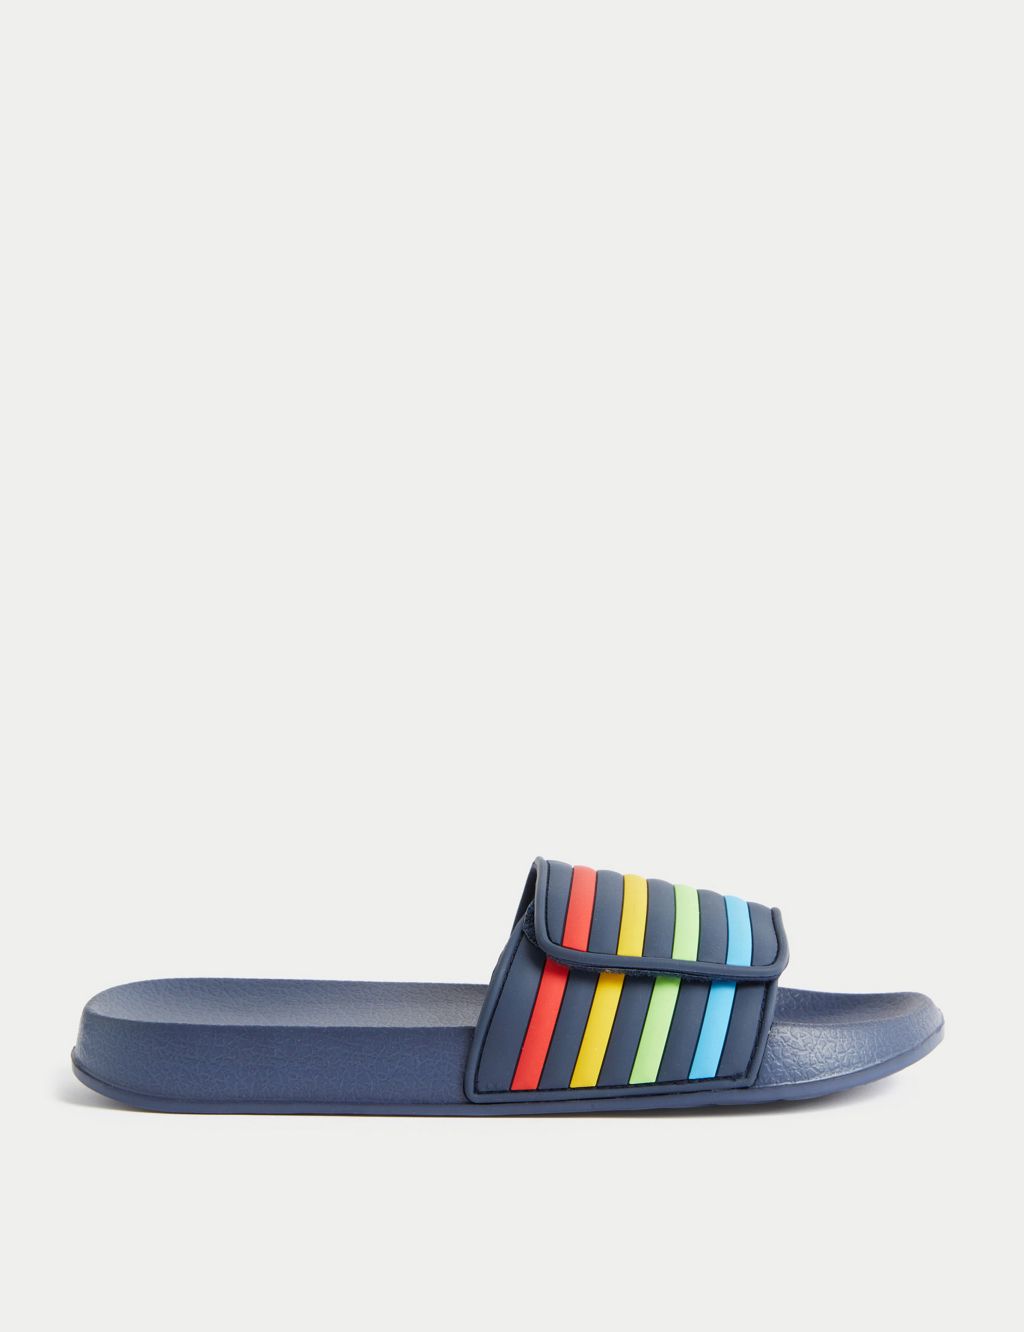 Kids' Striped Sliders (13 Small - 7 Large) image 1